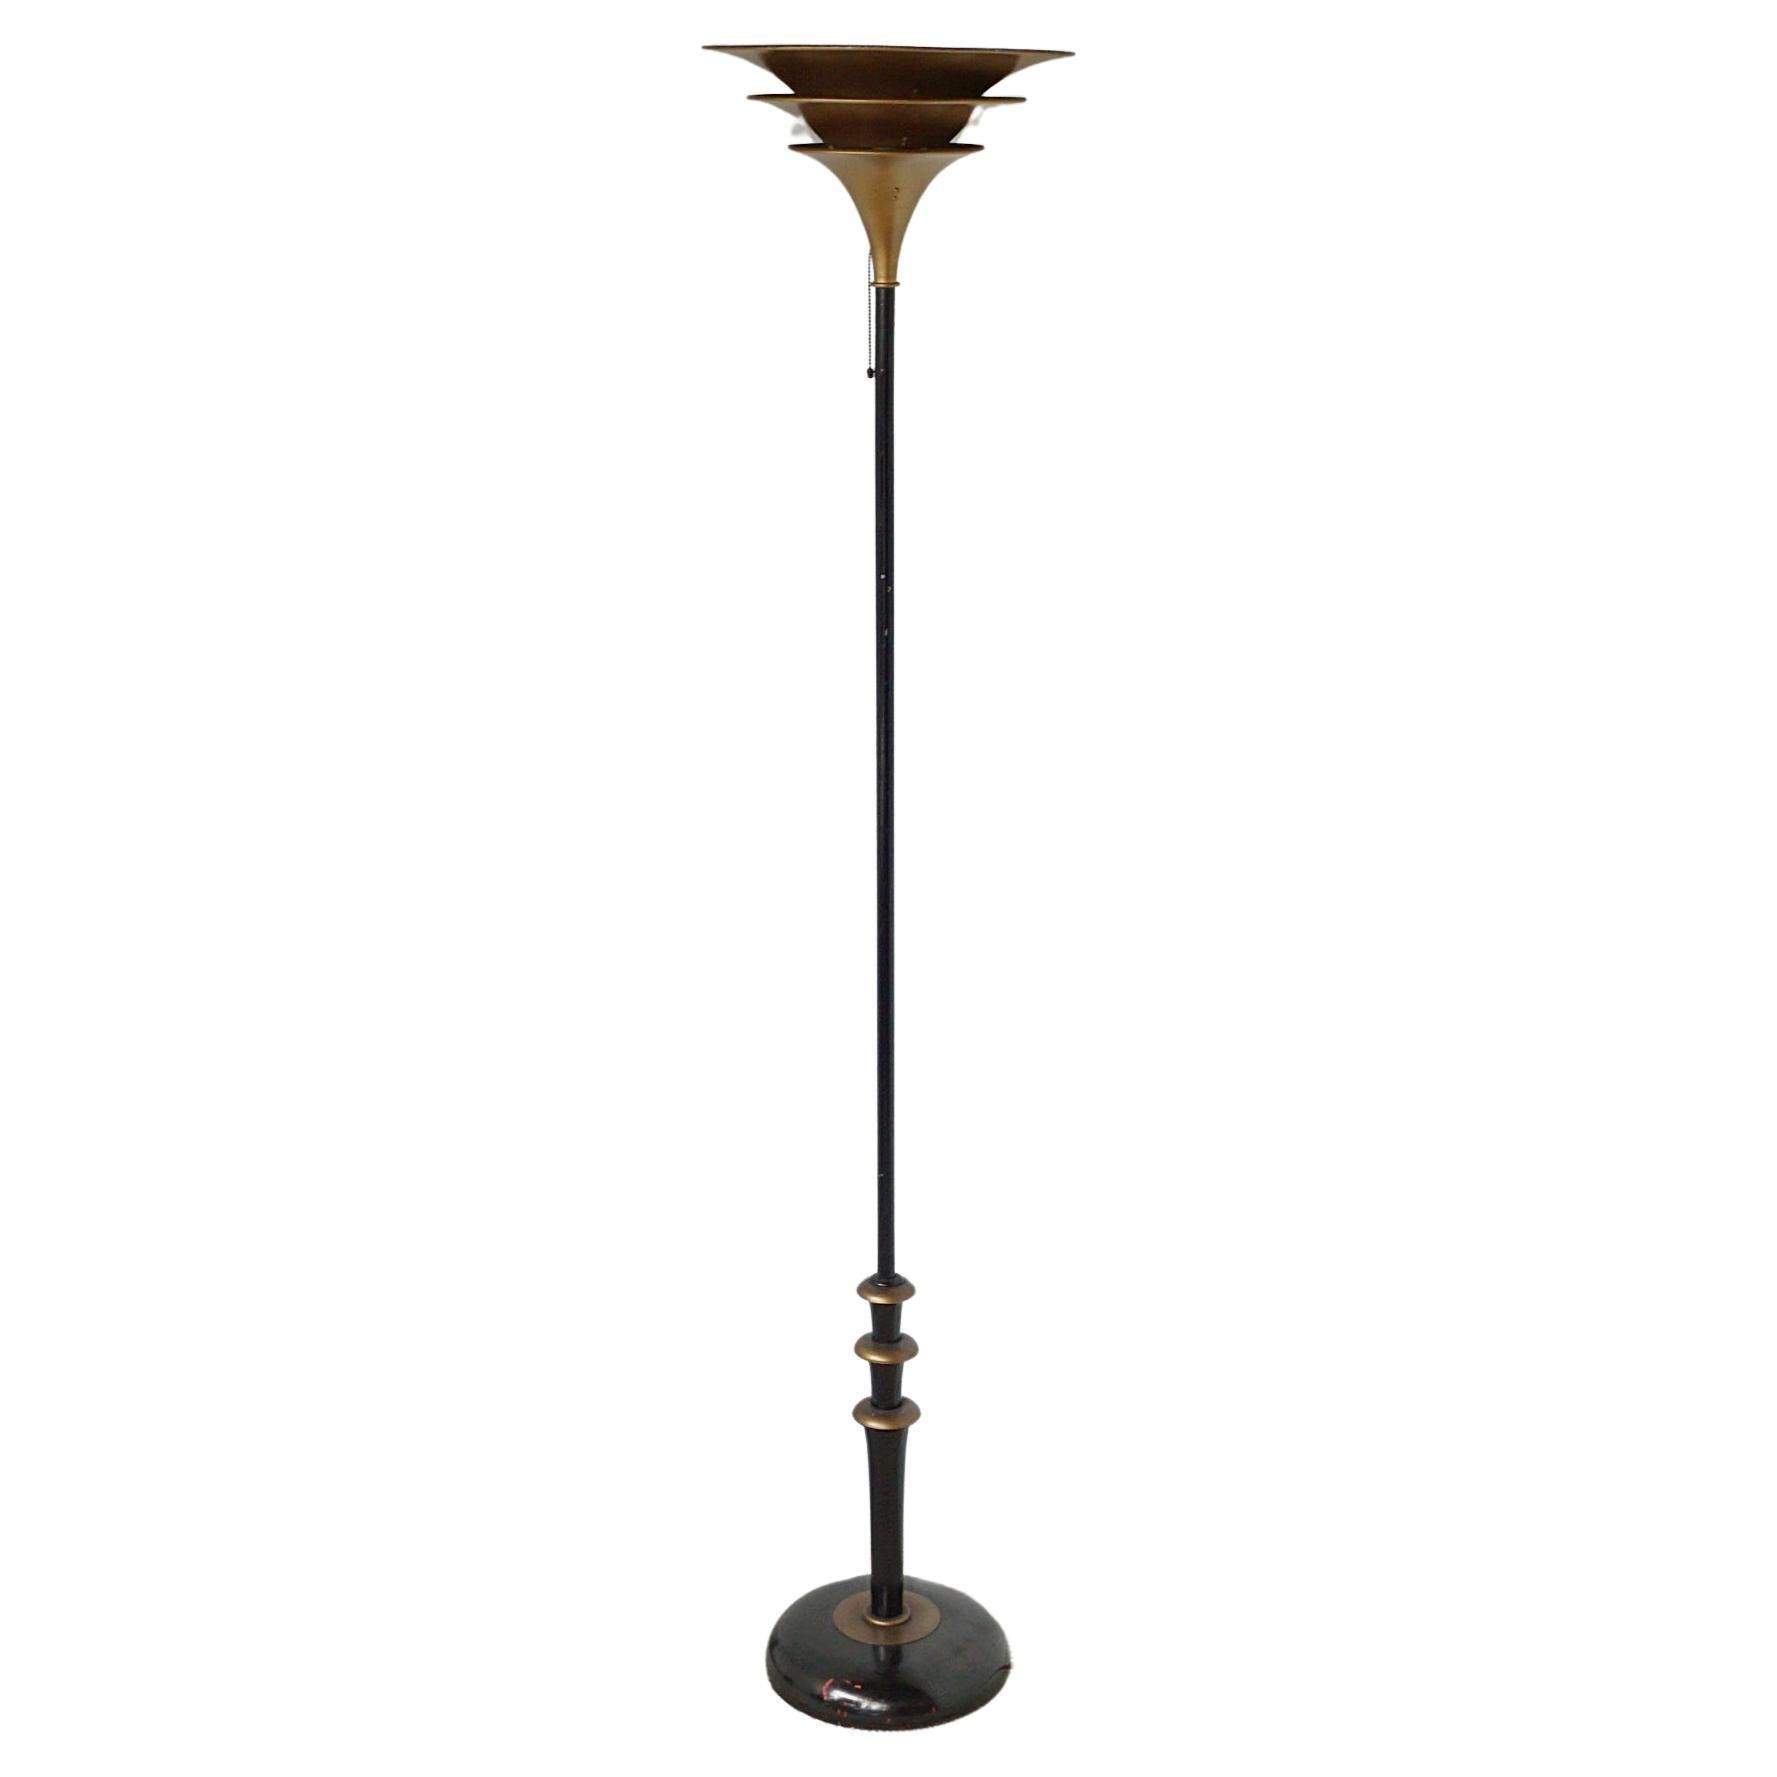 A French Art Deco Gilt Brass and Enamel Uplighter For Sale